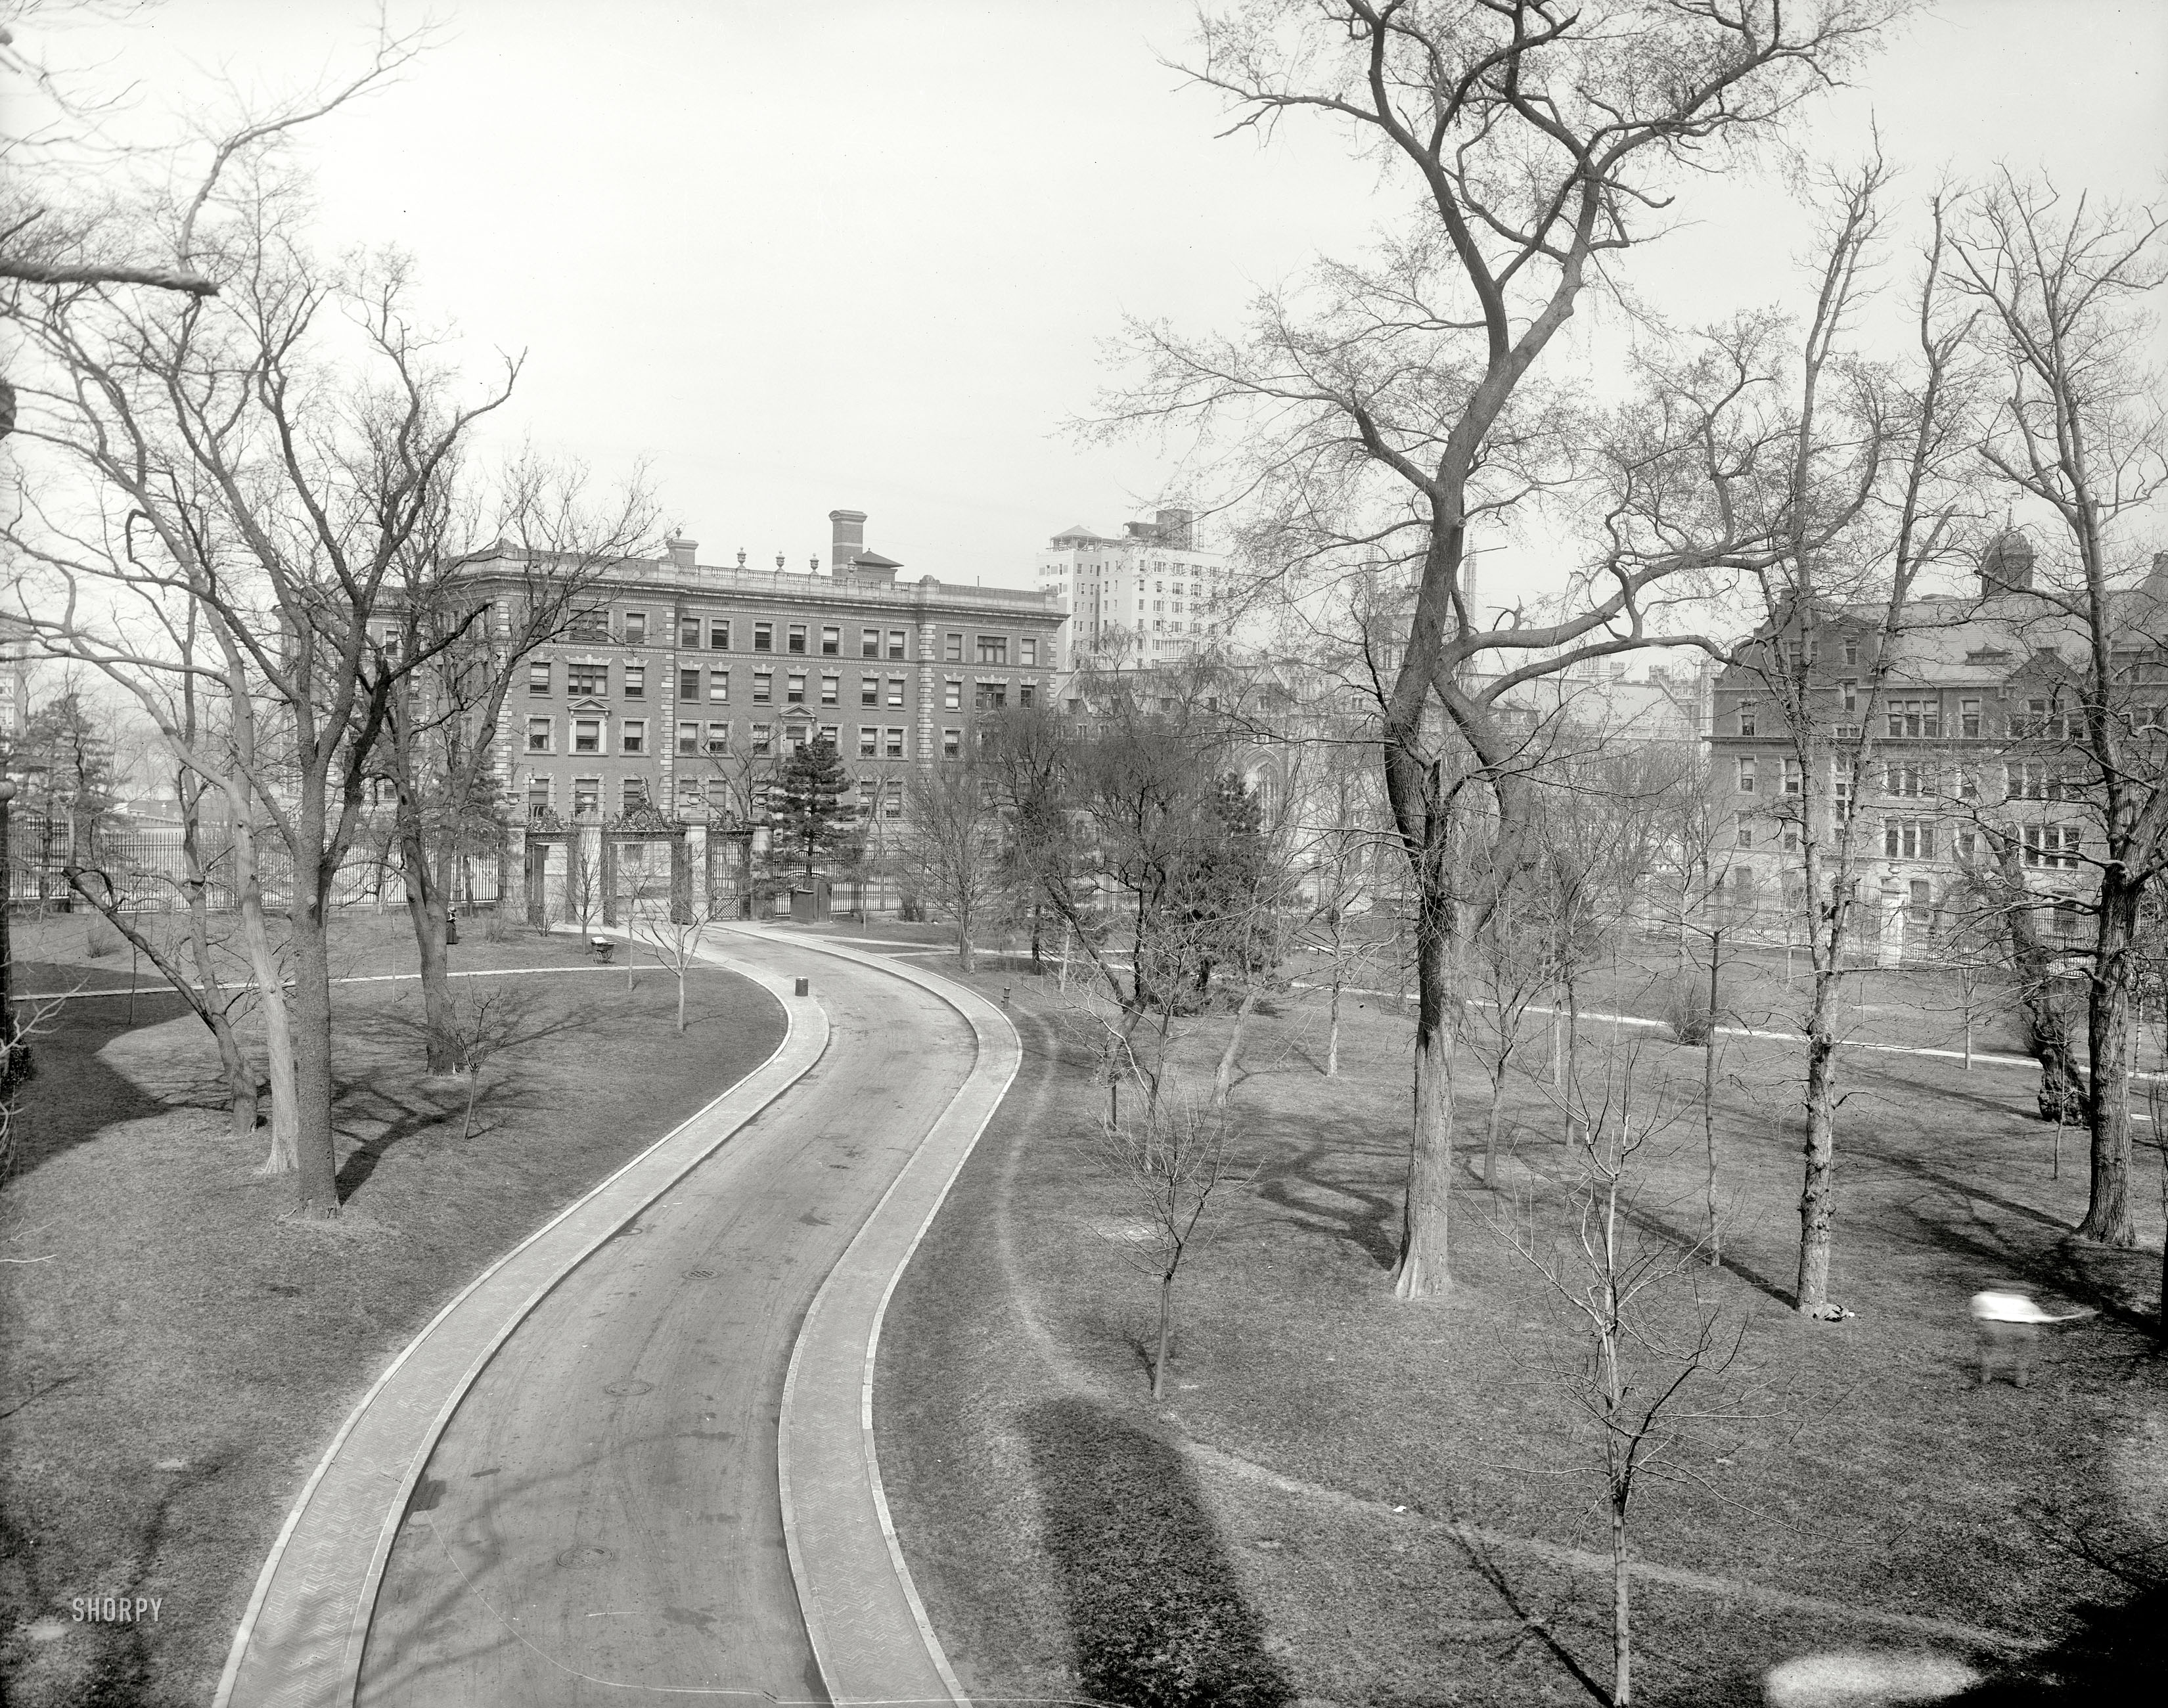 New York circa 1910. "The campus, Columbia University." 8x10 inch dry plate glass negative, Detroit Publishing Company. View full size.